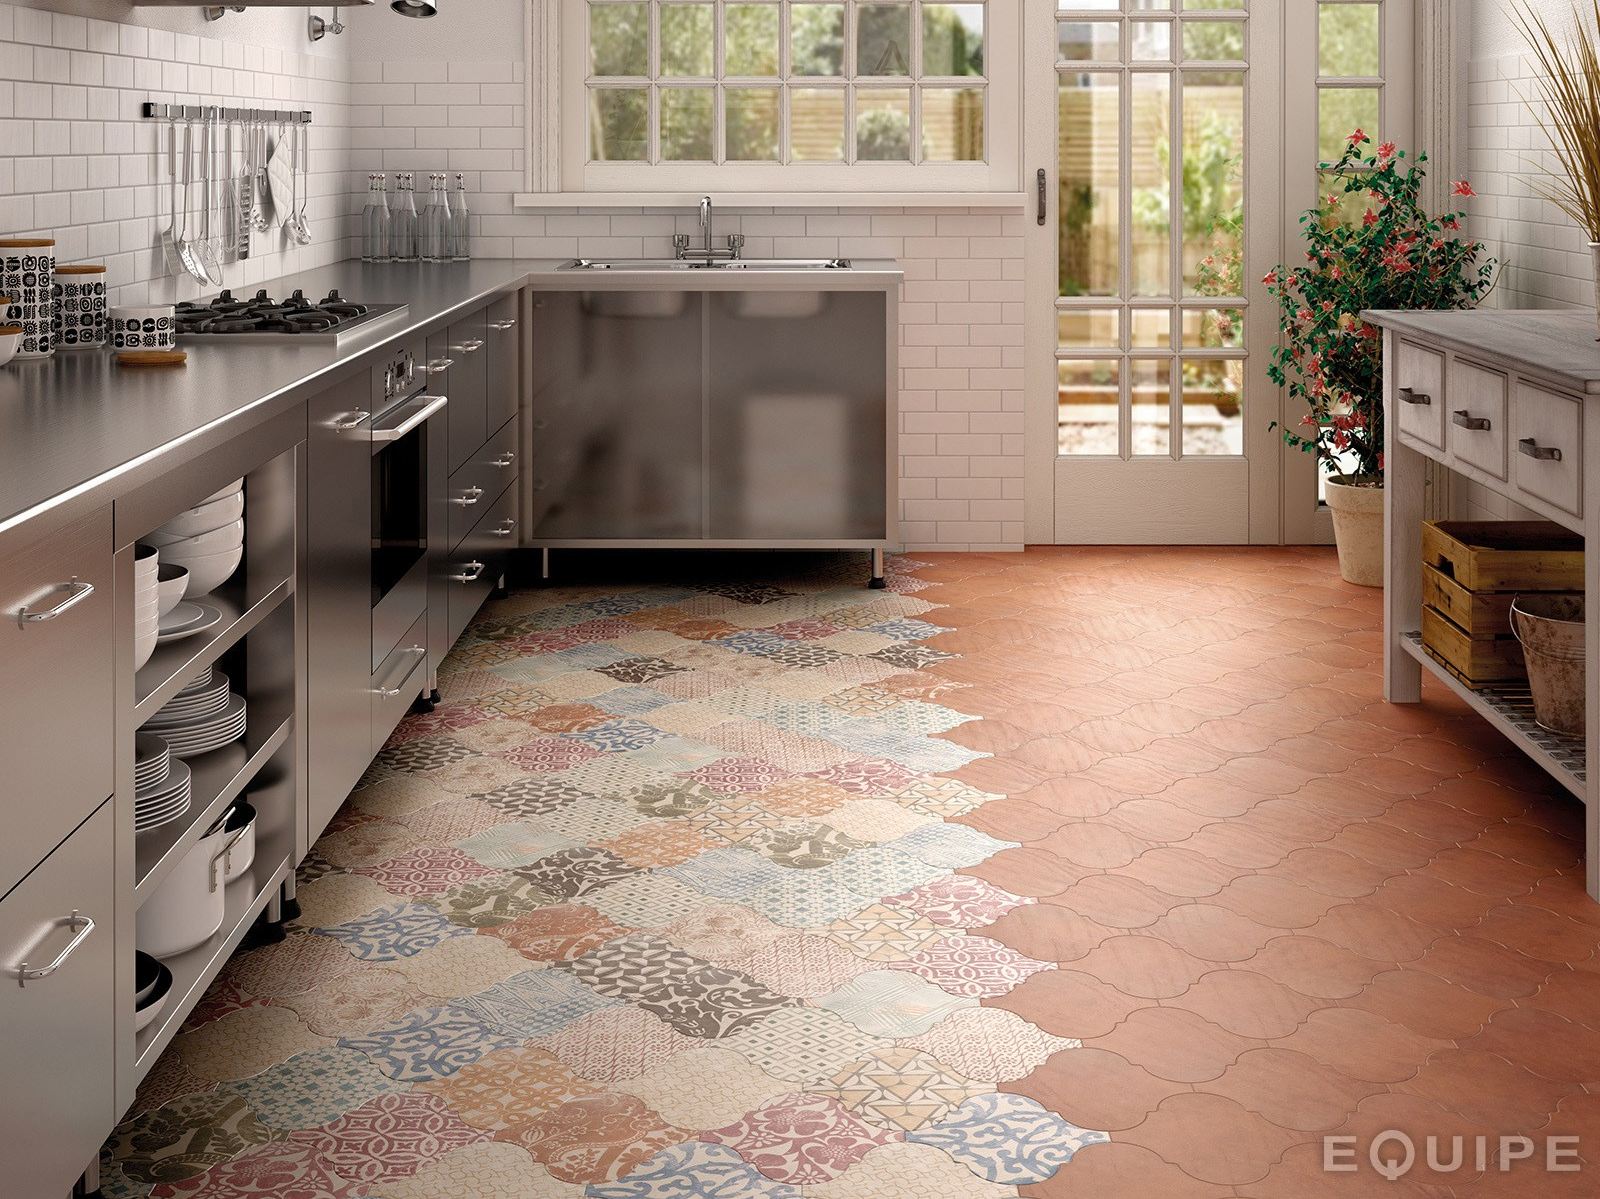 Sensible Choice Kitchen Floor Tiles for Classy Finish